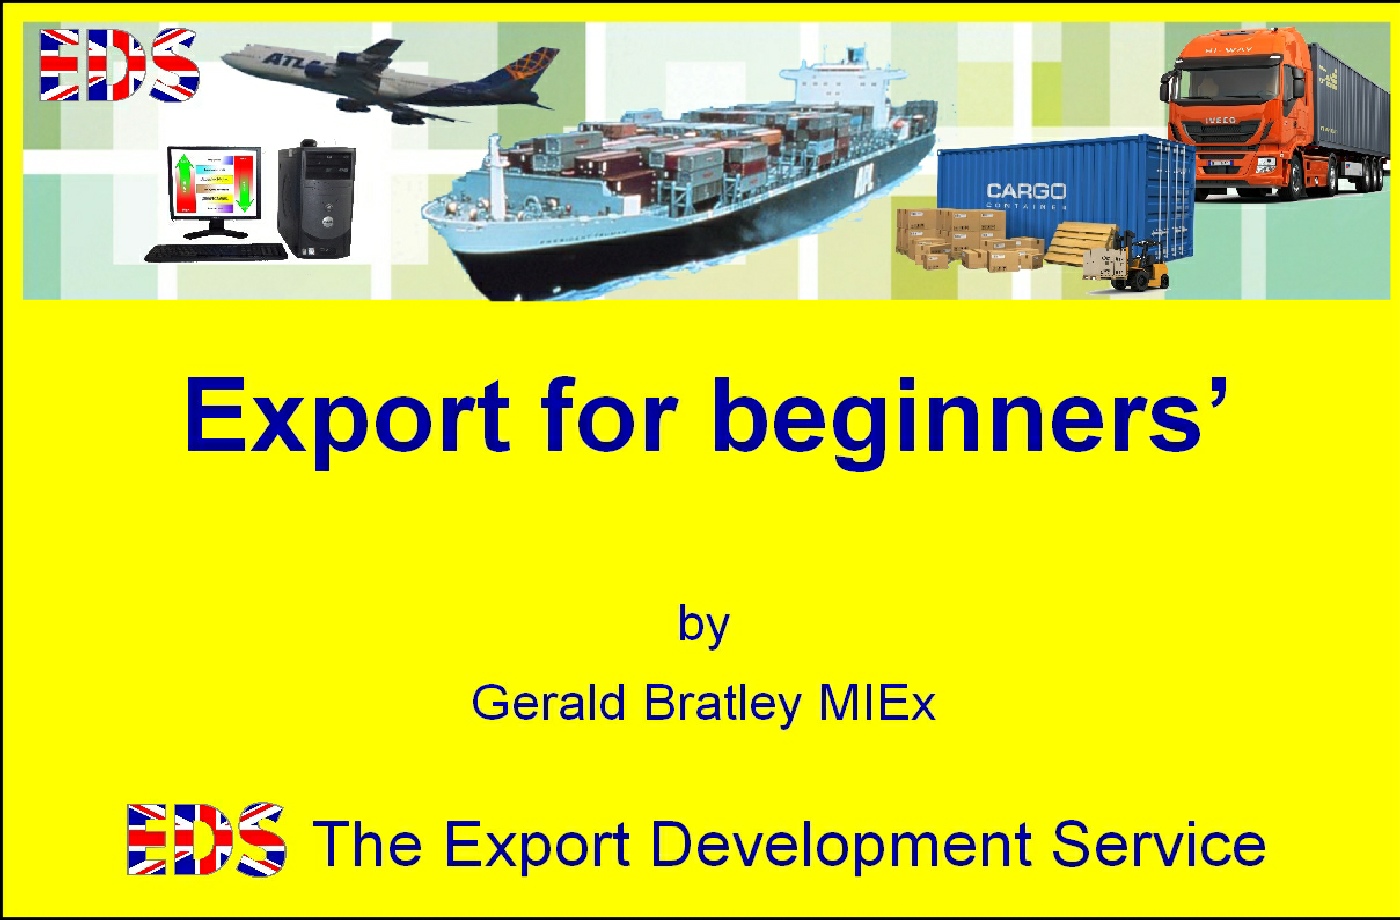 Export for beginners A5.pdf